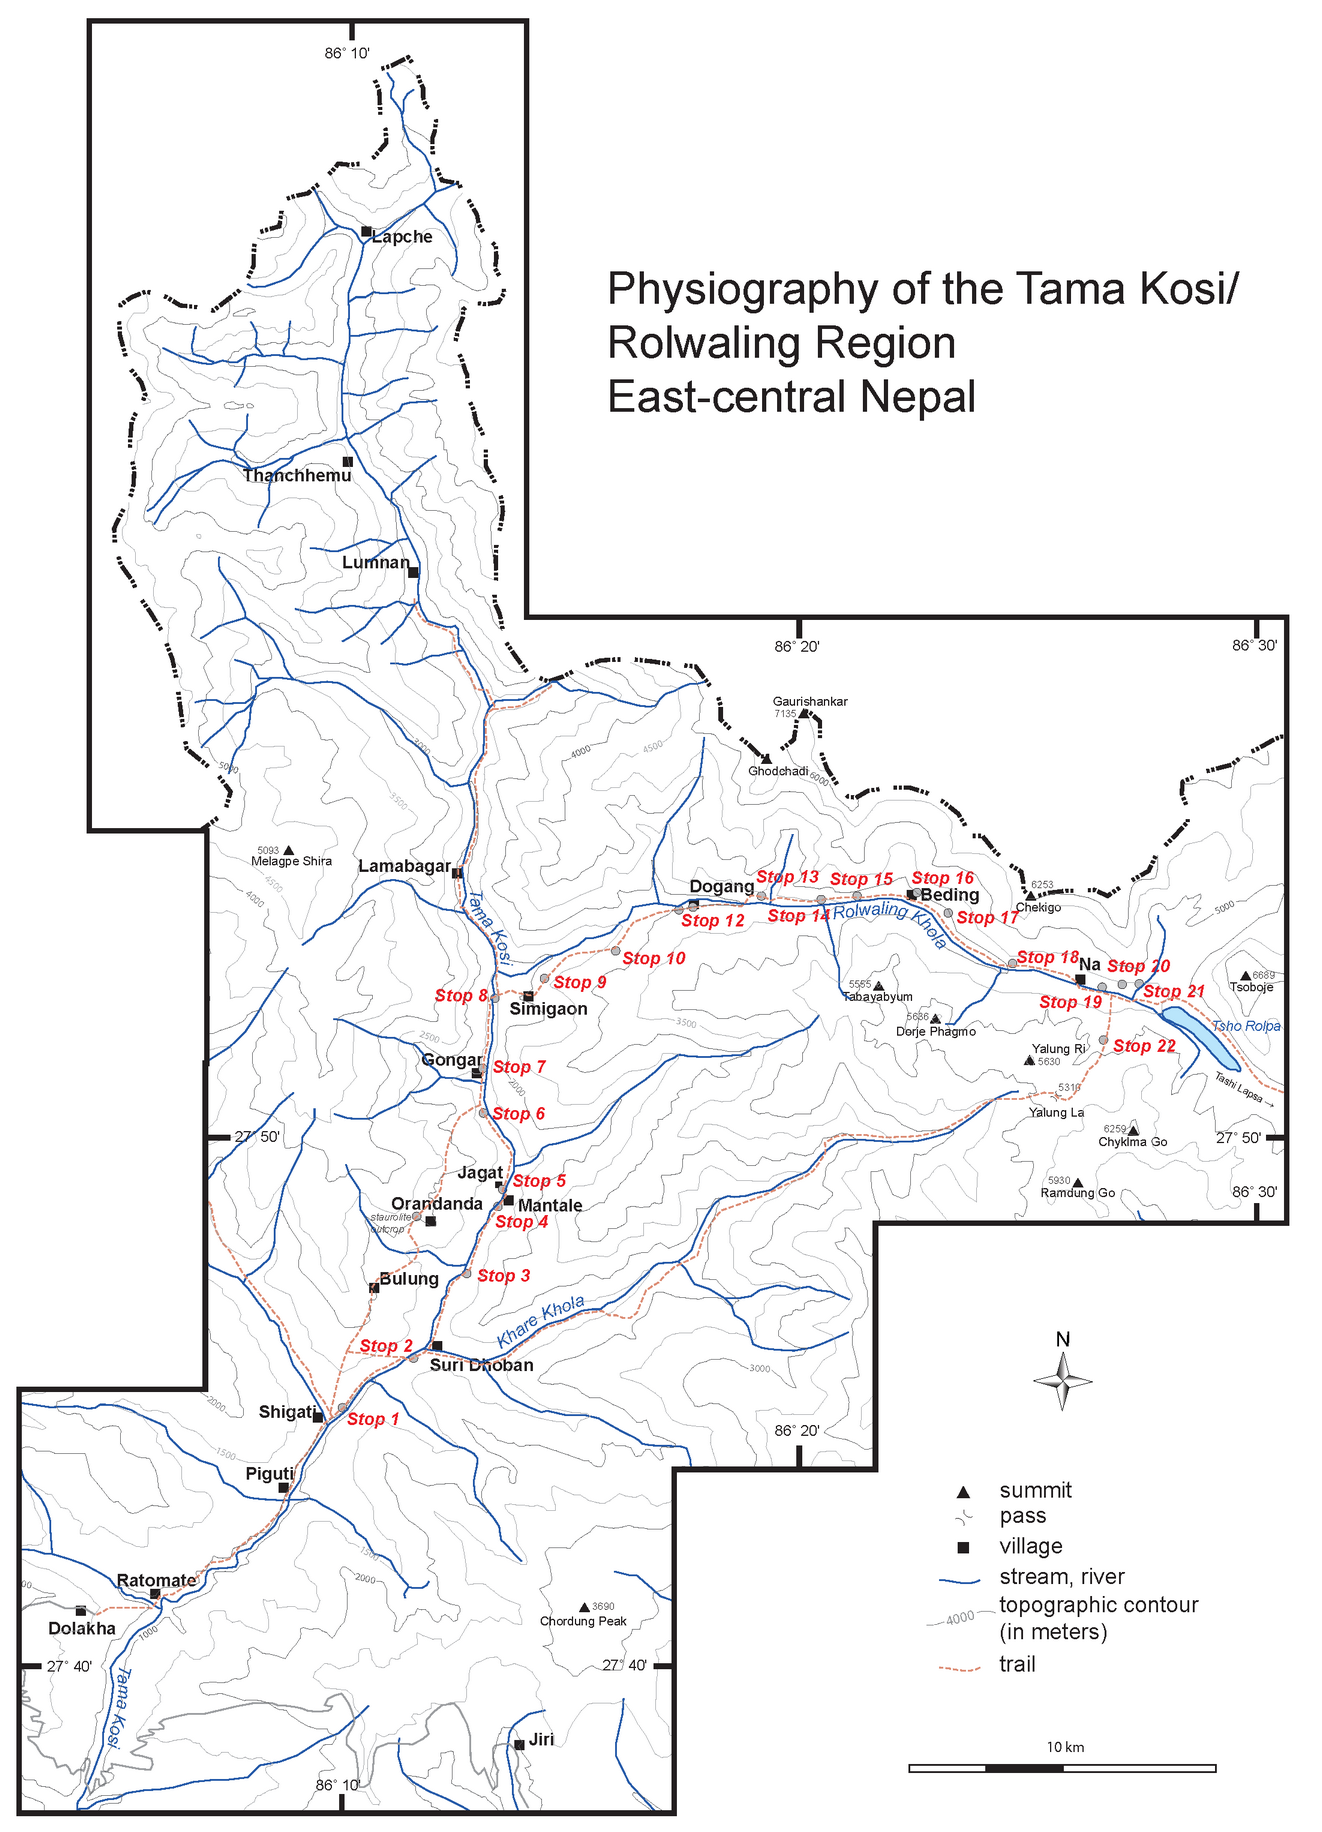 Physiographic map of the Tama Kosi/Rolwaling region